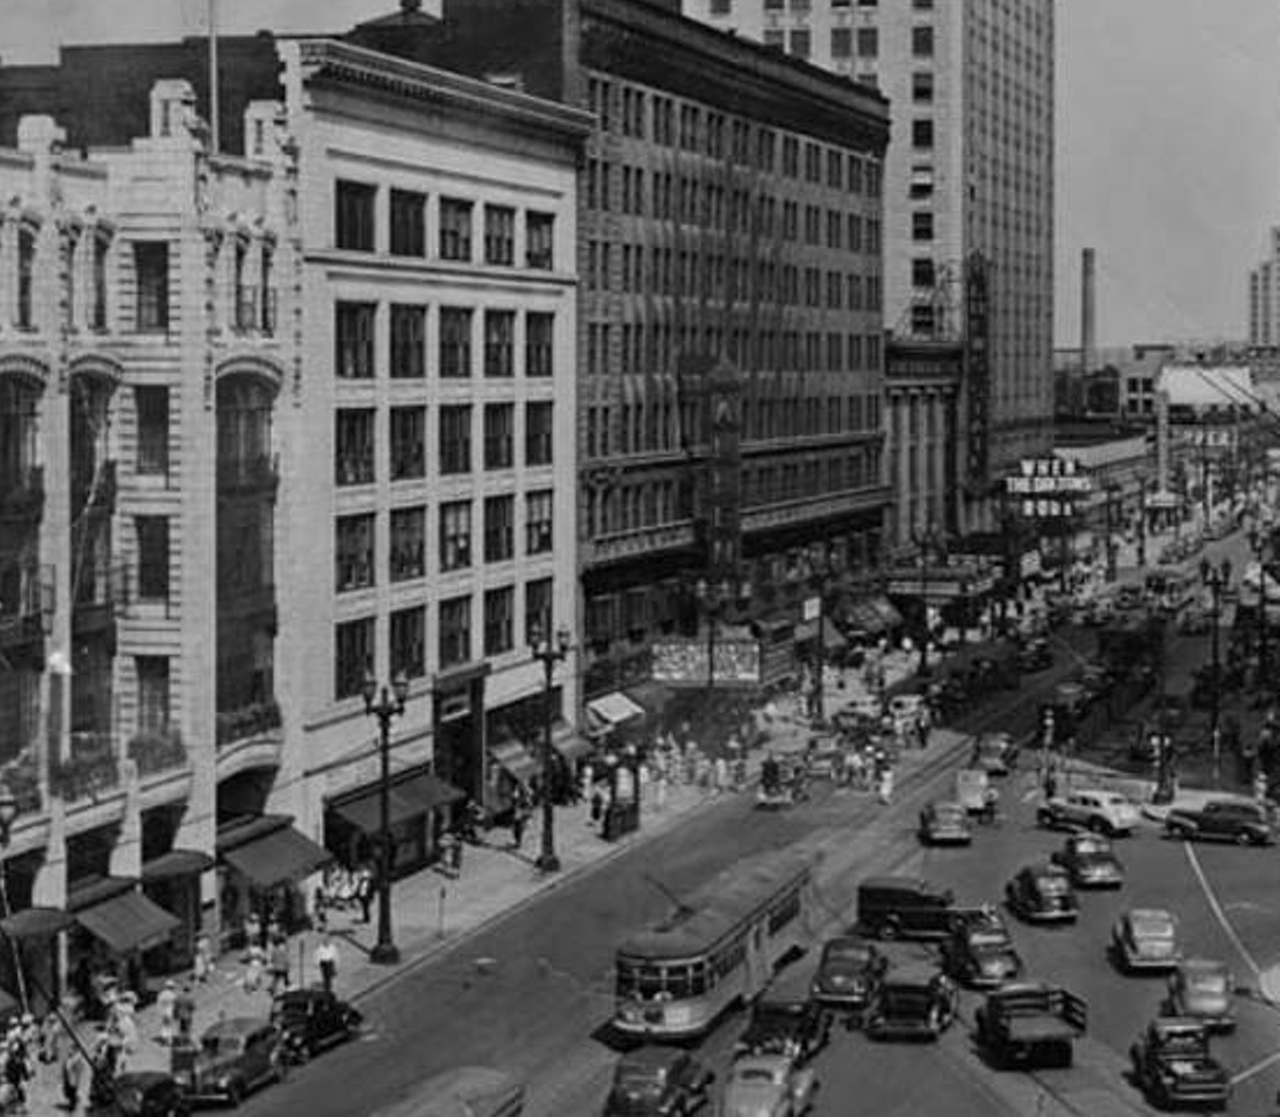 Euclid Avenue in 1940, right before WWII.